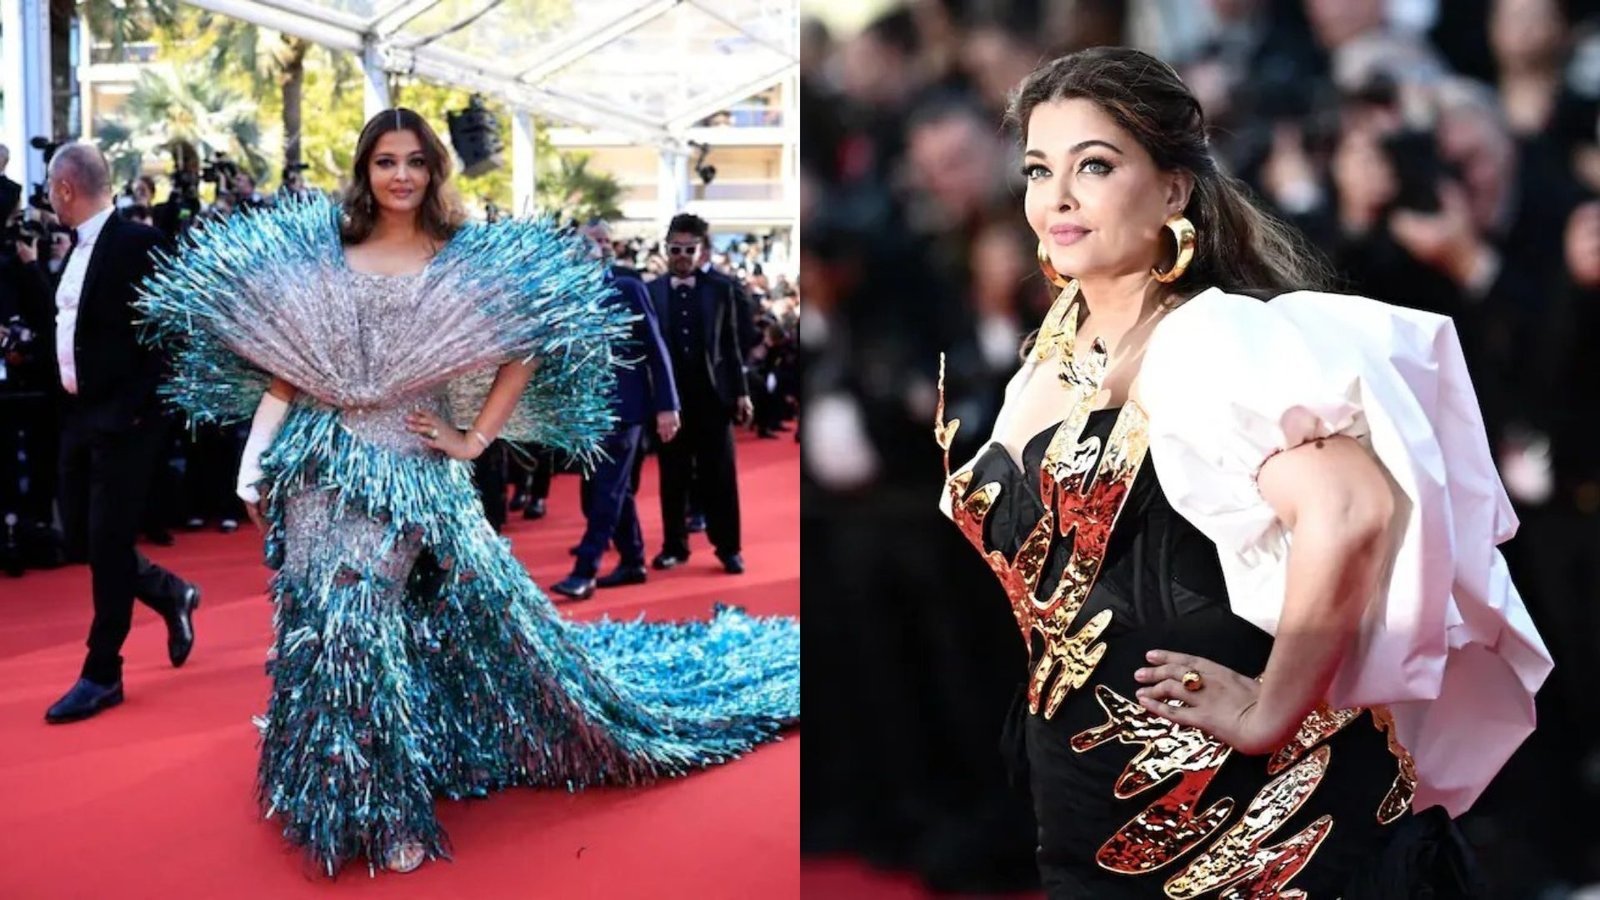 Bollywood fans disappointed by Aishwarya Rai’s Cannes outfits